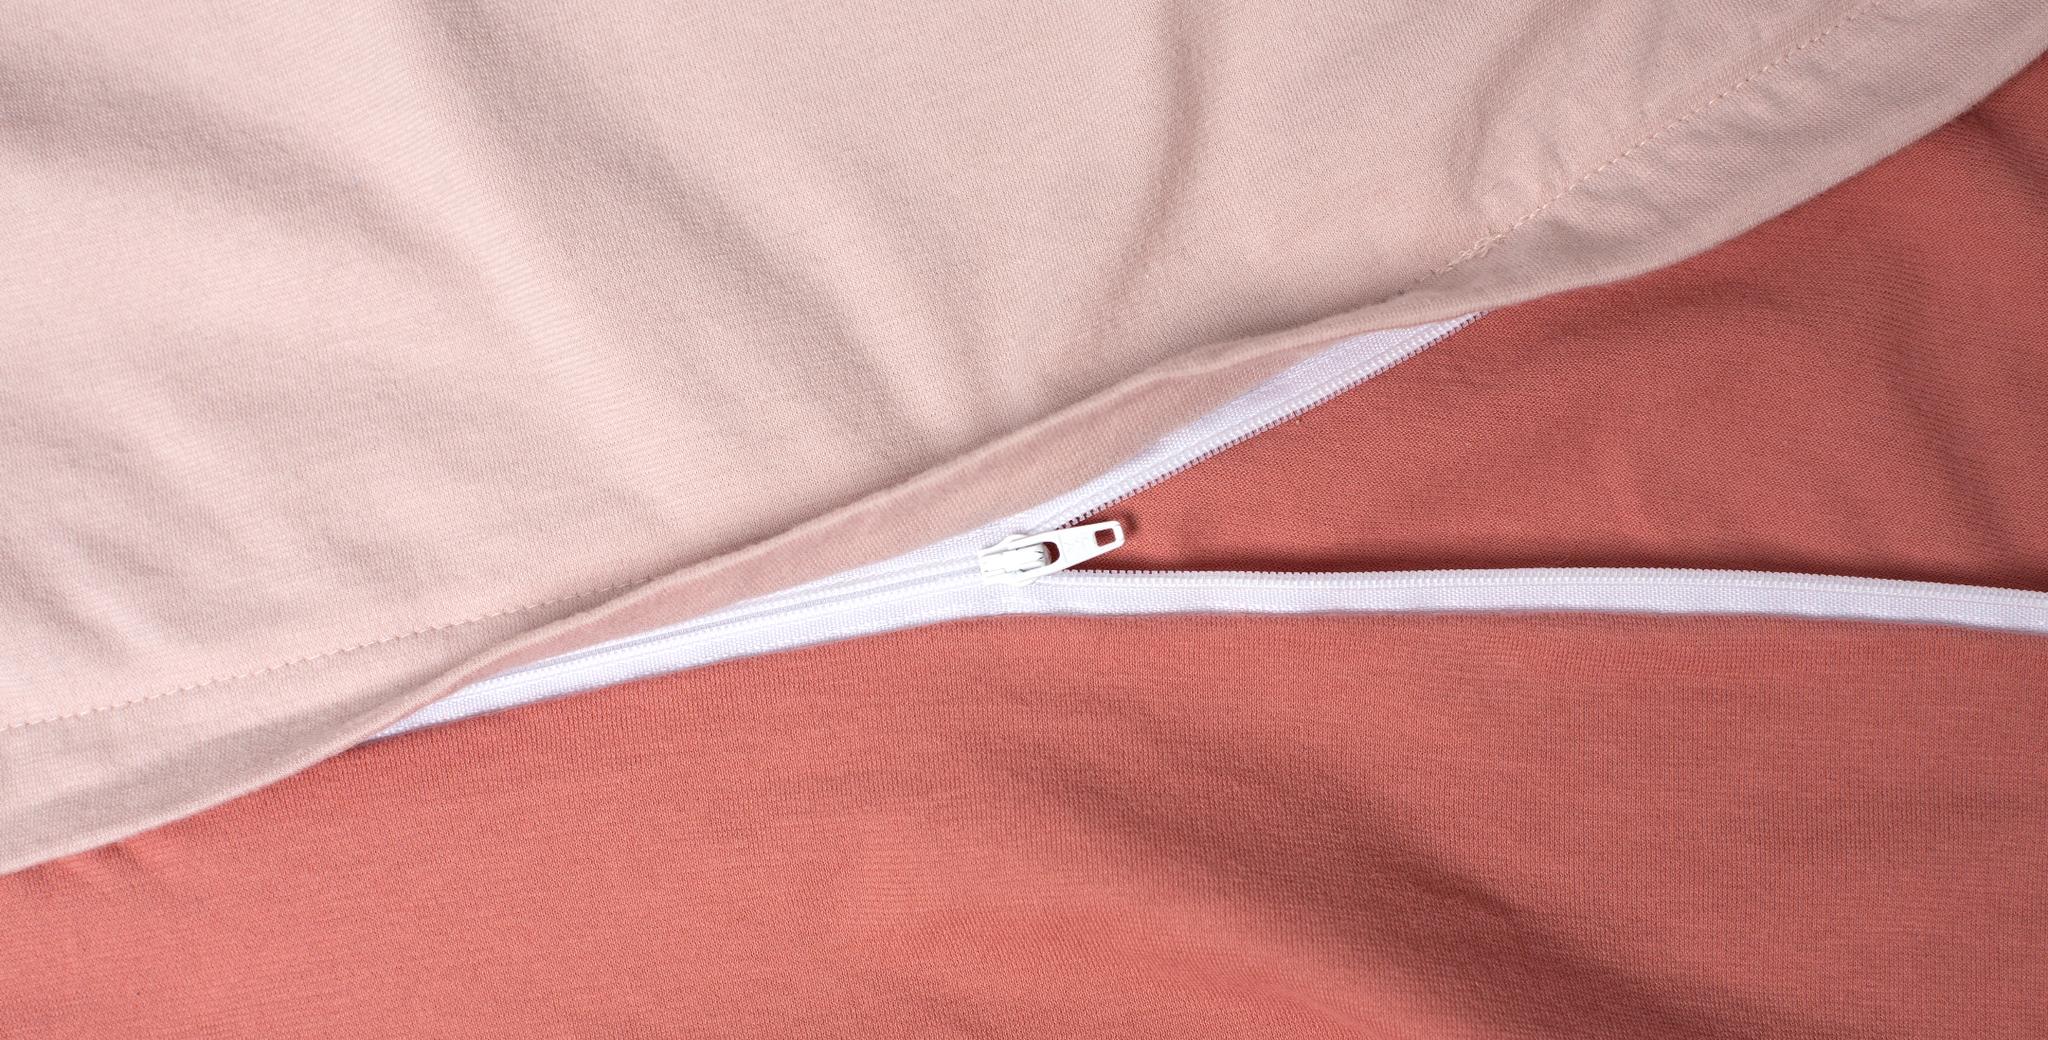 Fitted Sheet | A Fitted Sheet Is Designed To Be Snugly Fitted To Your Mattress